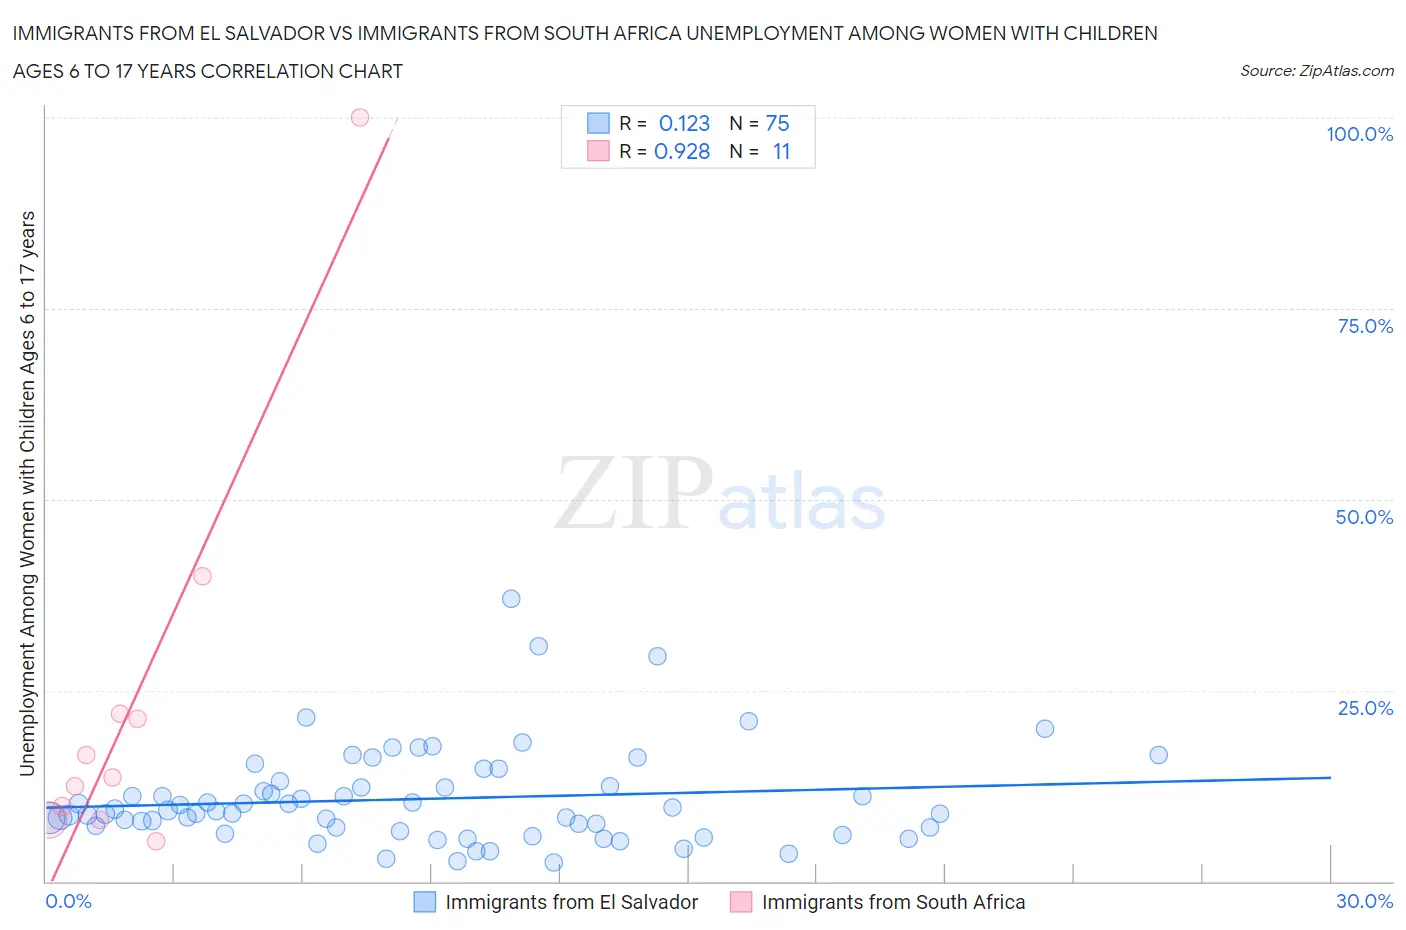 Immigrants from El Salvador vs Immigrants from South Africa Unemployment Among Women with Children Ages 6 to 17 years